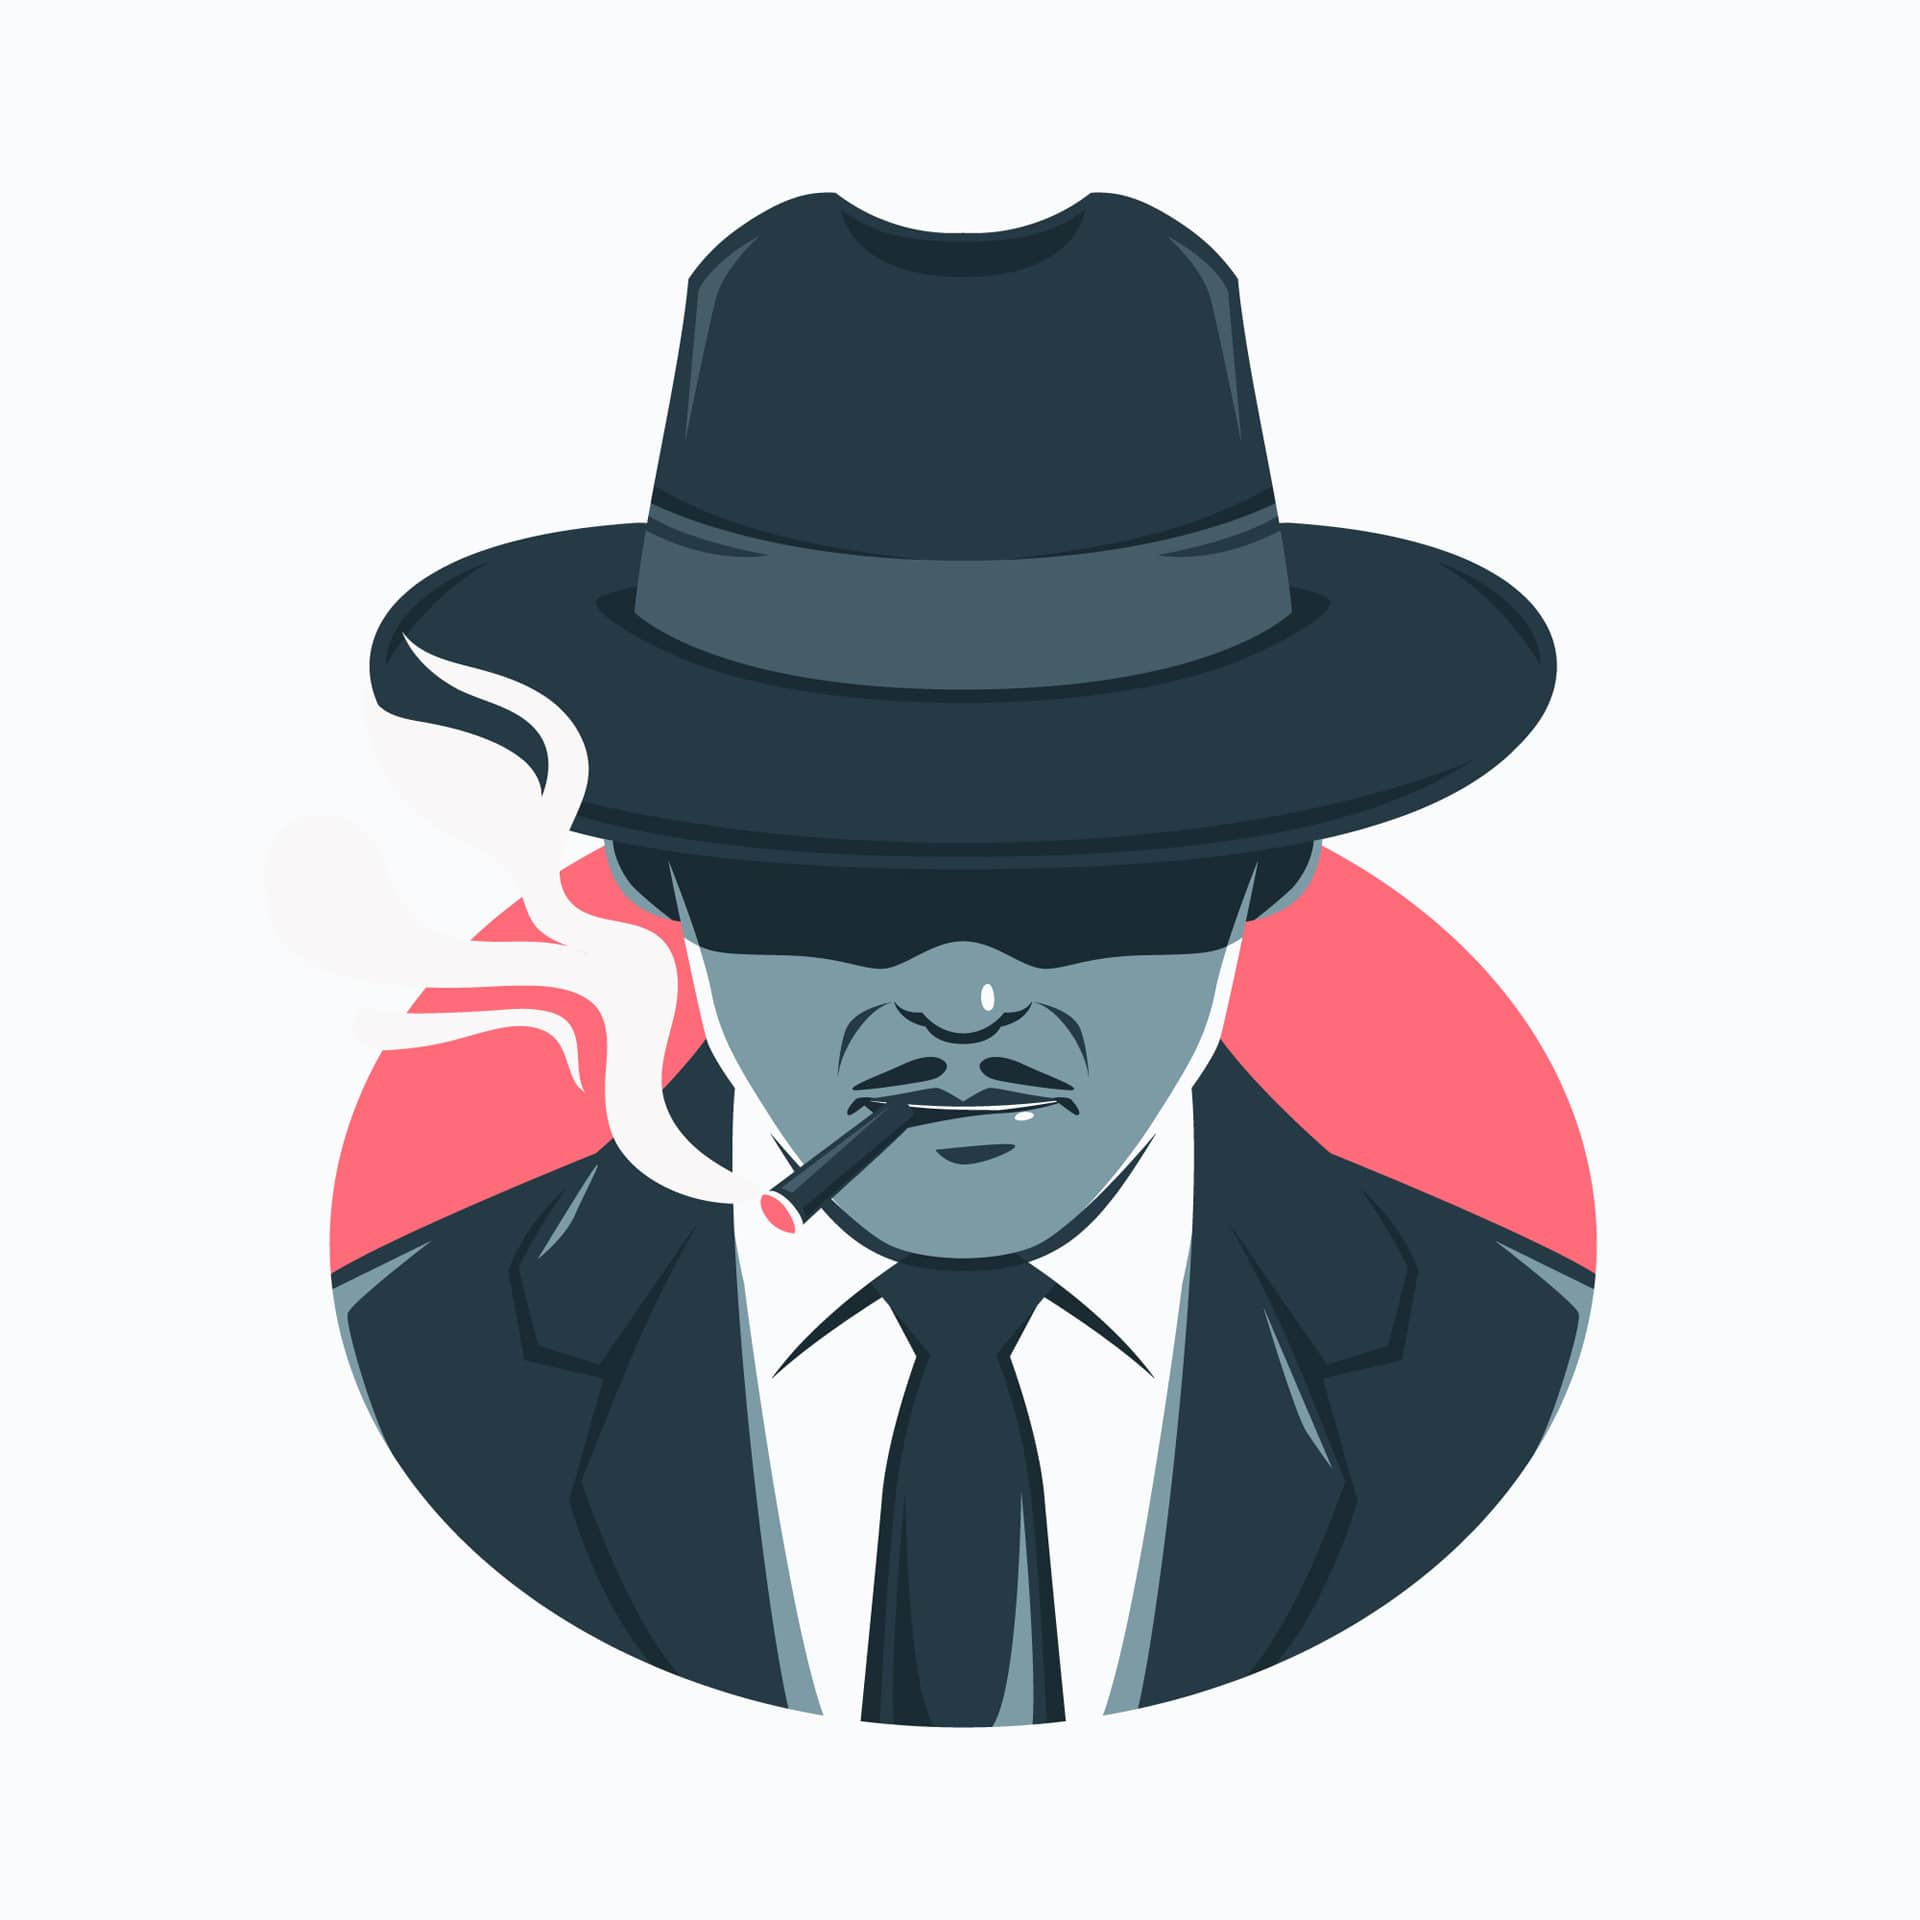 Man with a head in a hat and a cigarette